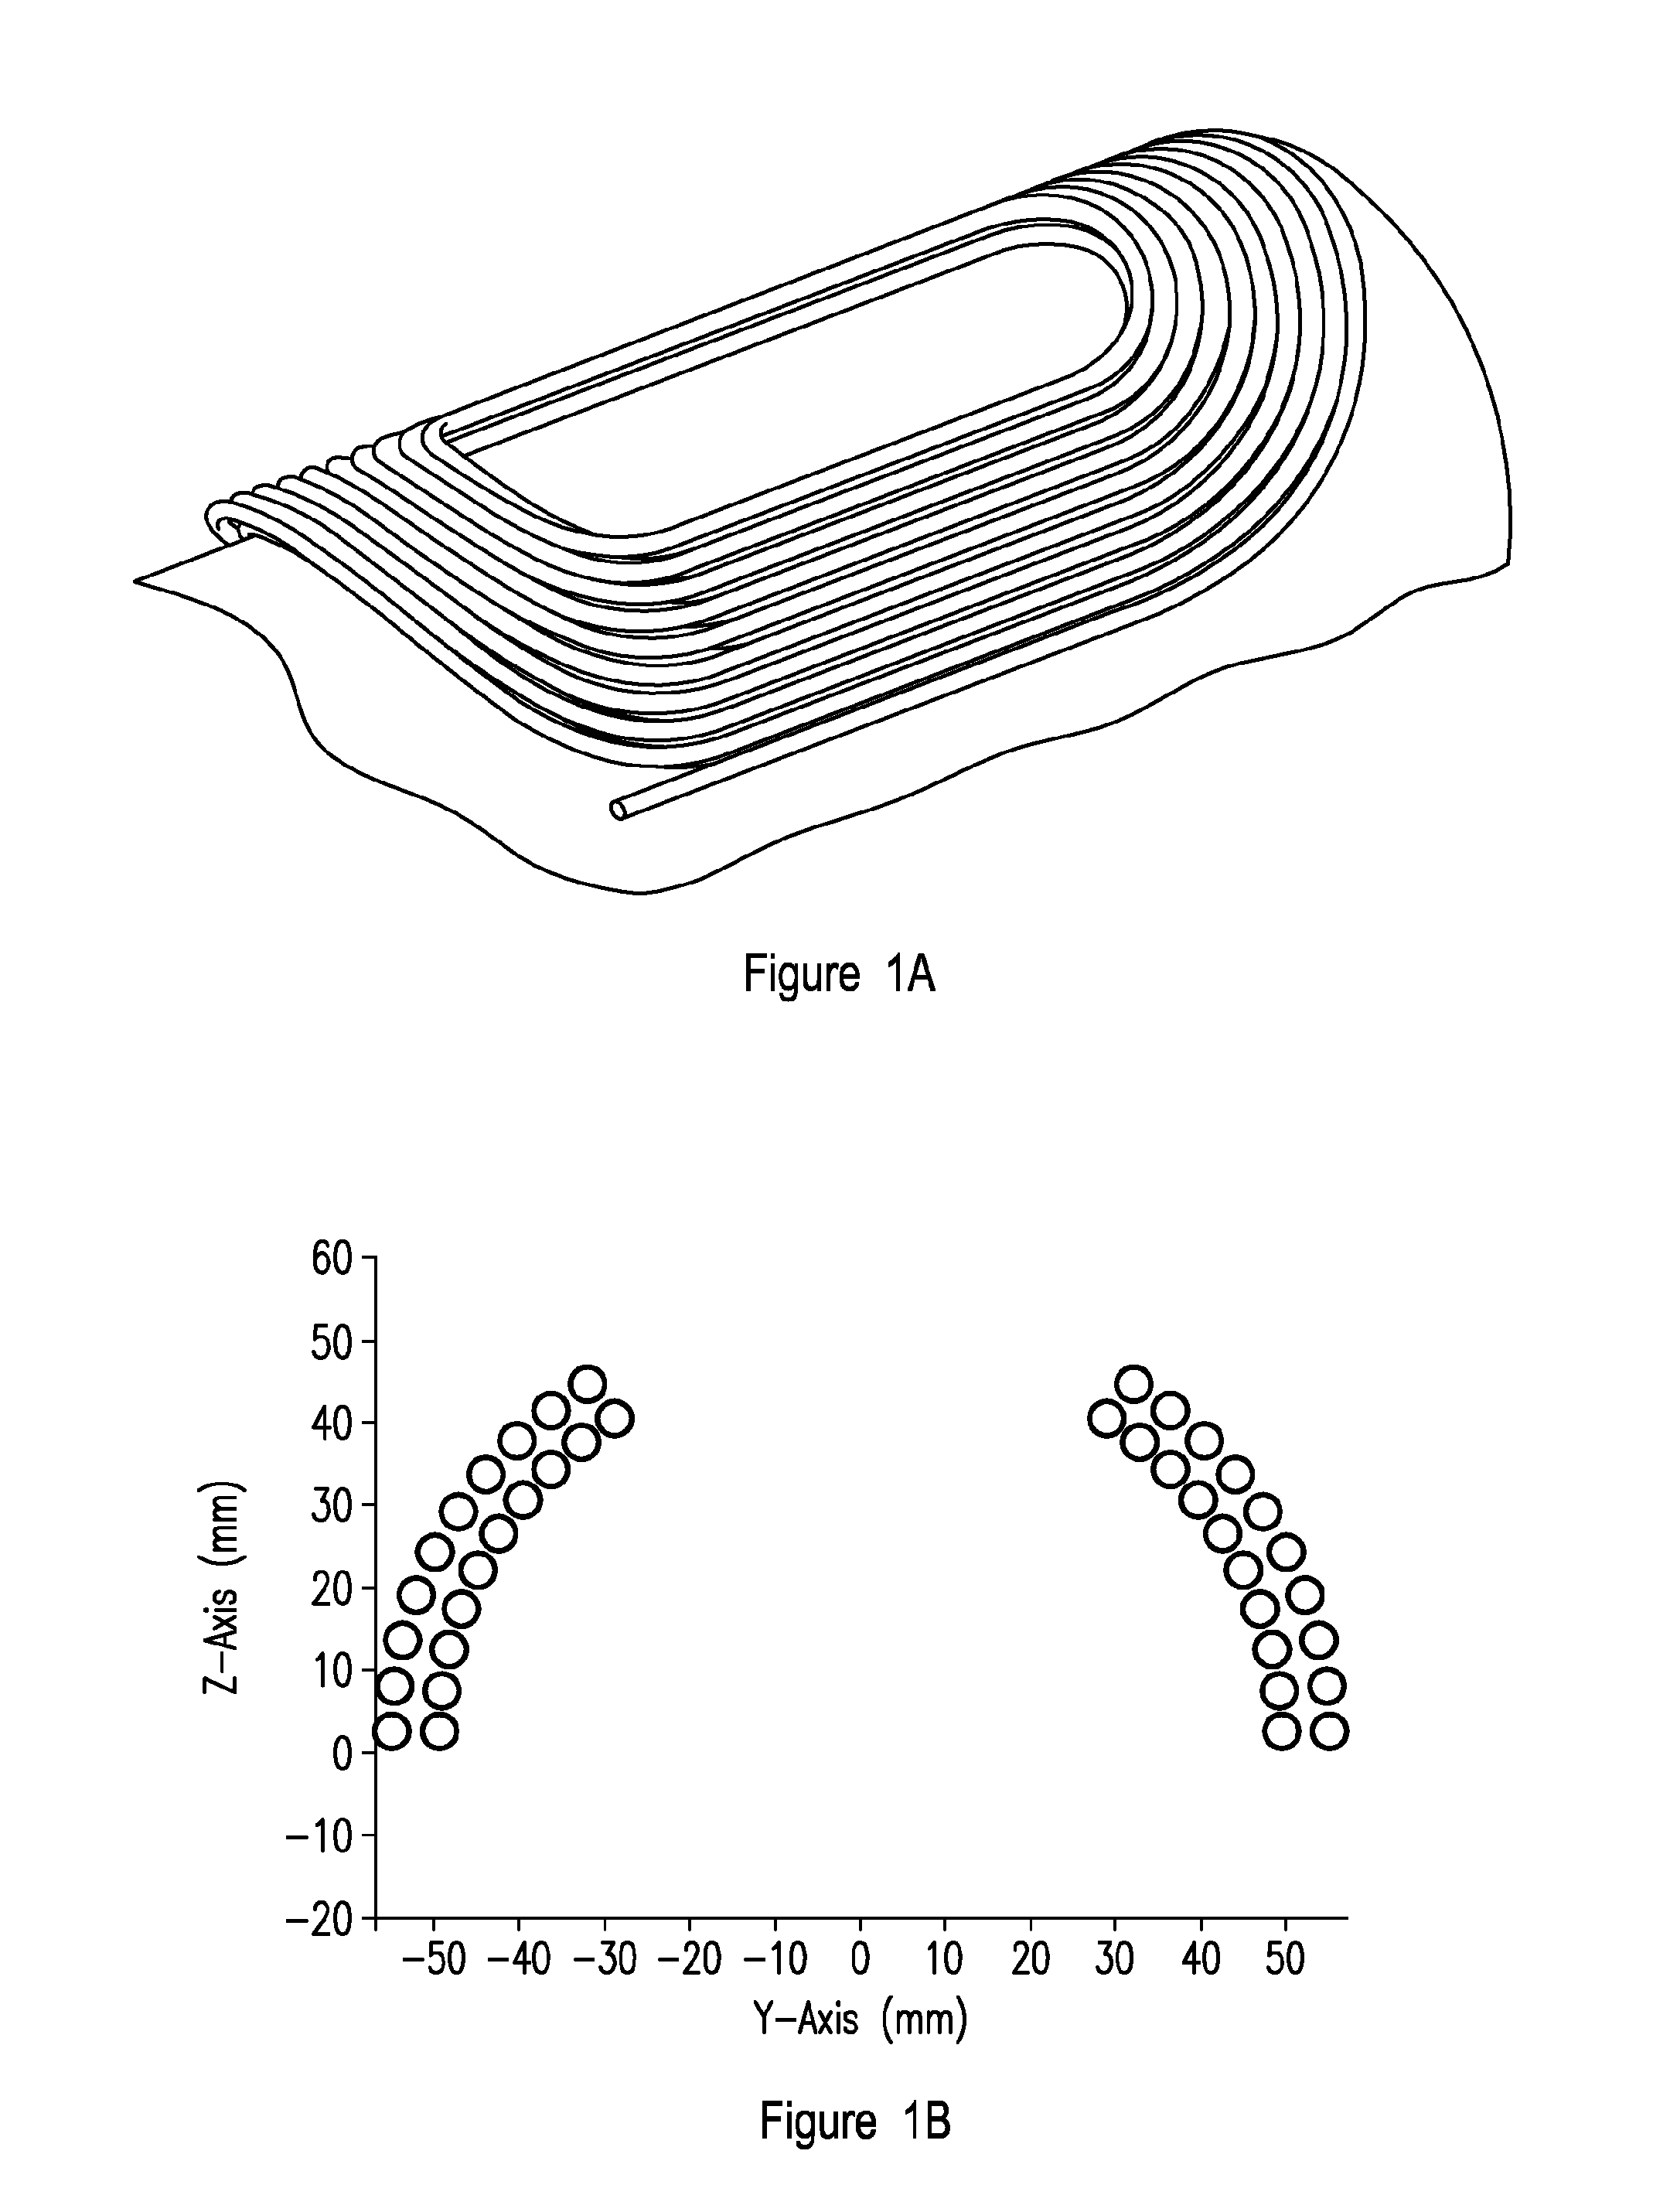 Wiring of assemblies and methods of forming channels in wiring assemblies